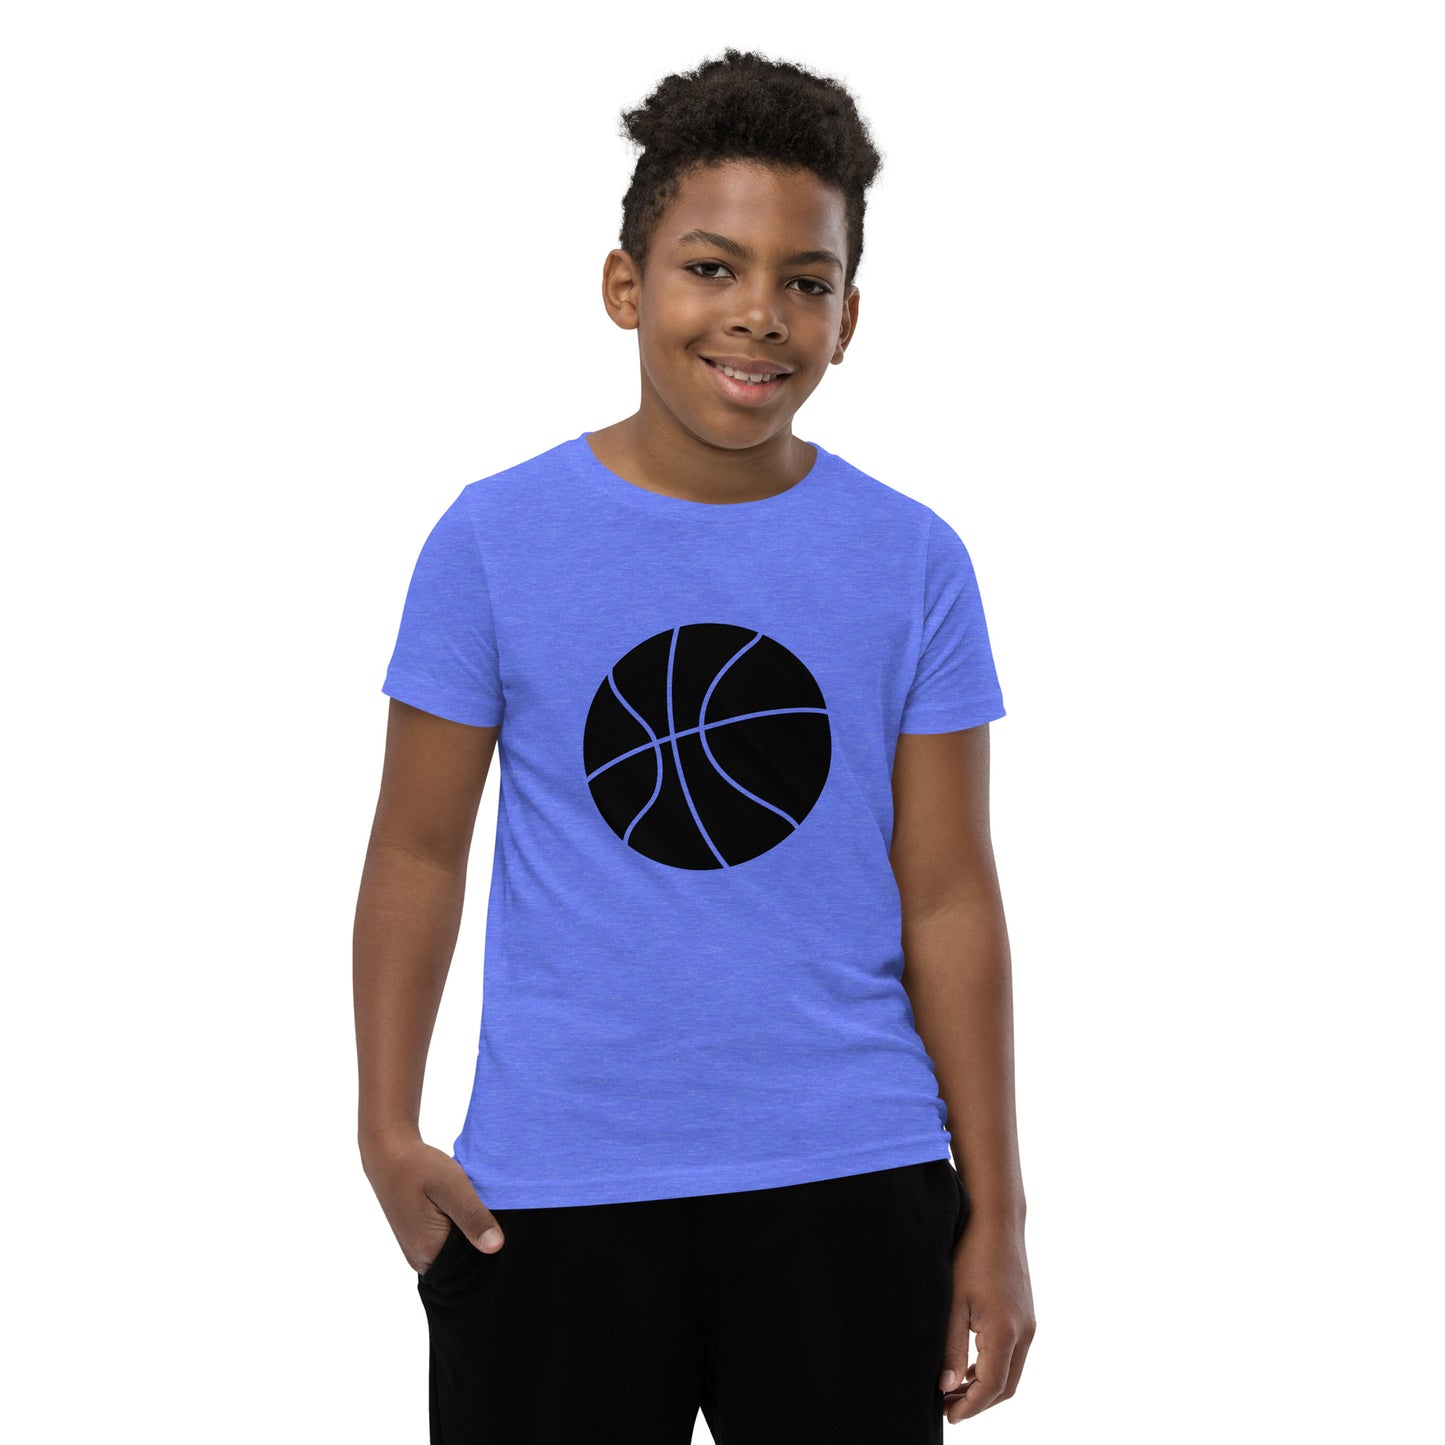 Basketball - Youth Short Sleeve T-Shirt (Unisex) ~ Sharon Dawn Collection